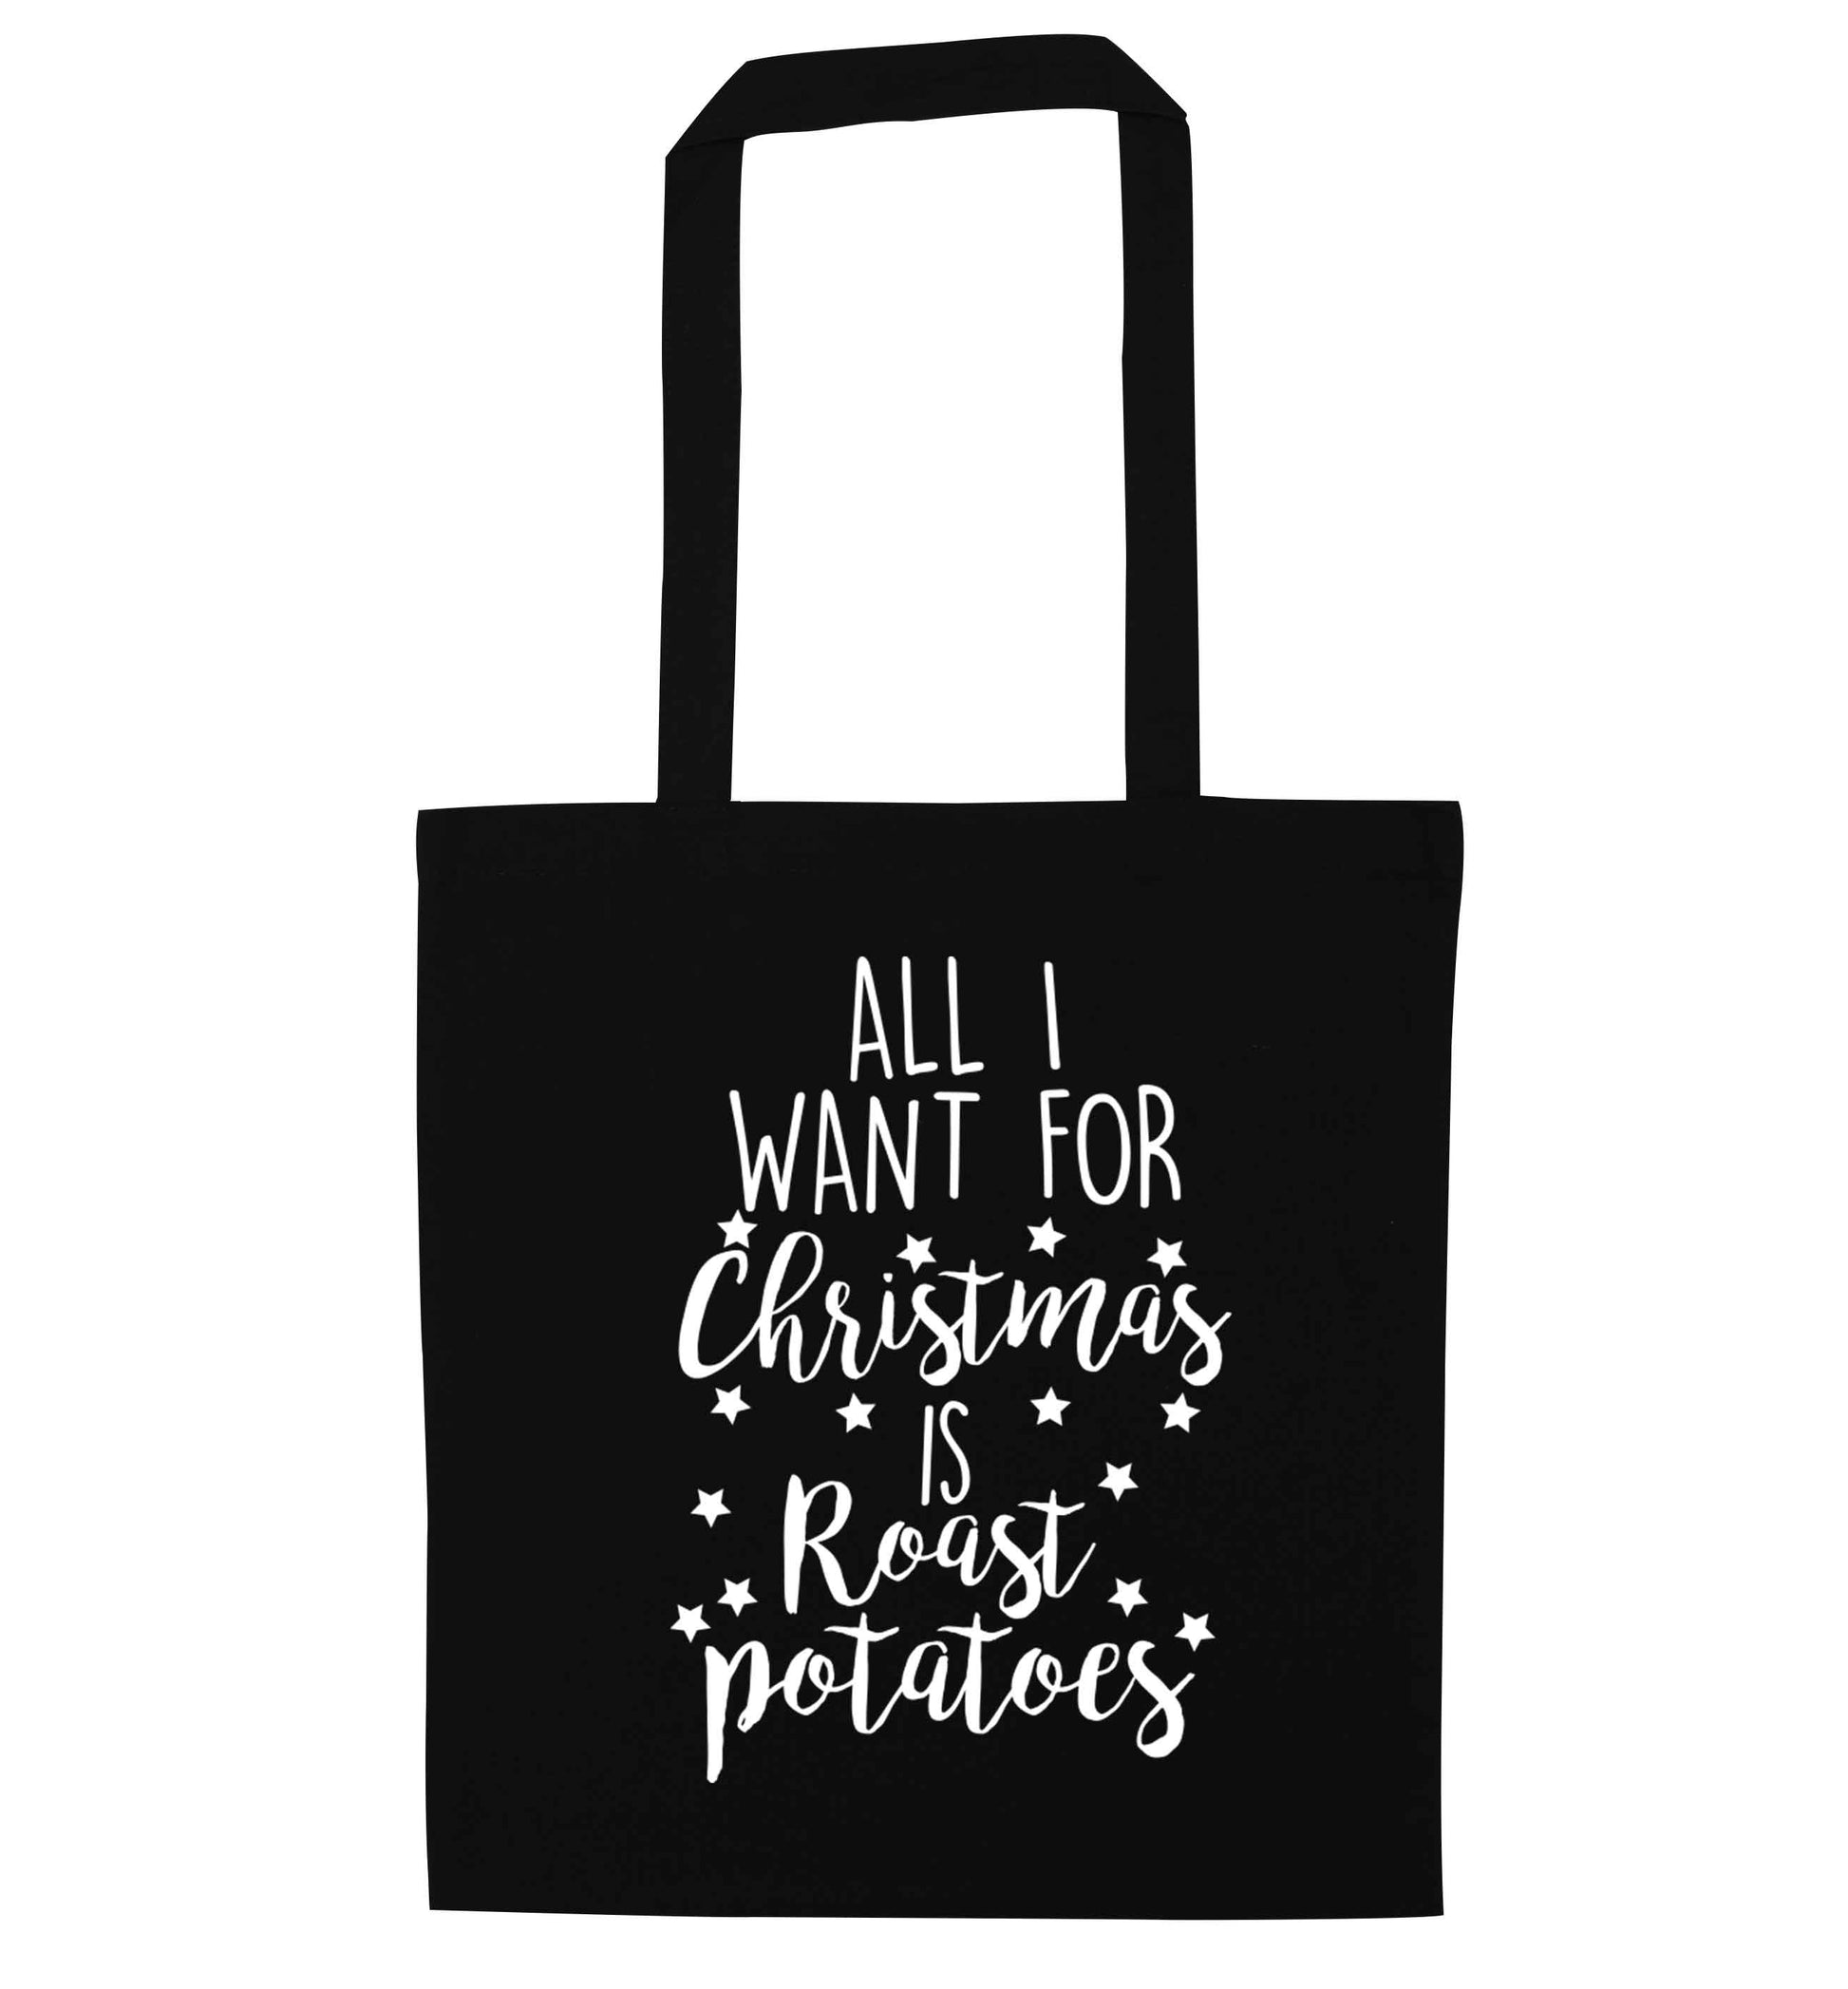 All I want for Christmas is roast potatoes black tote bag